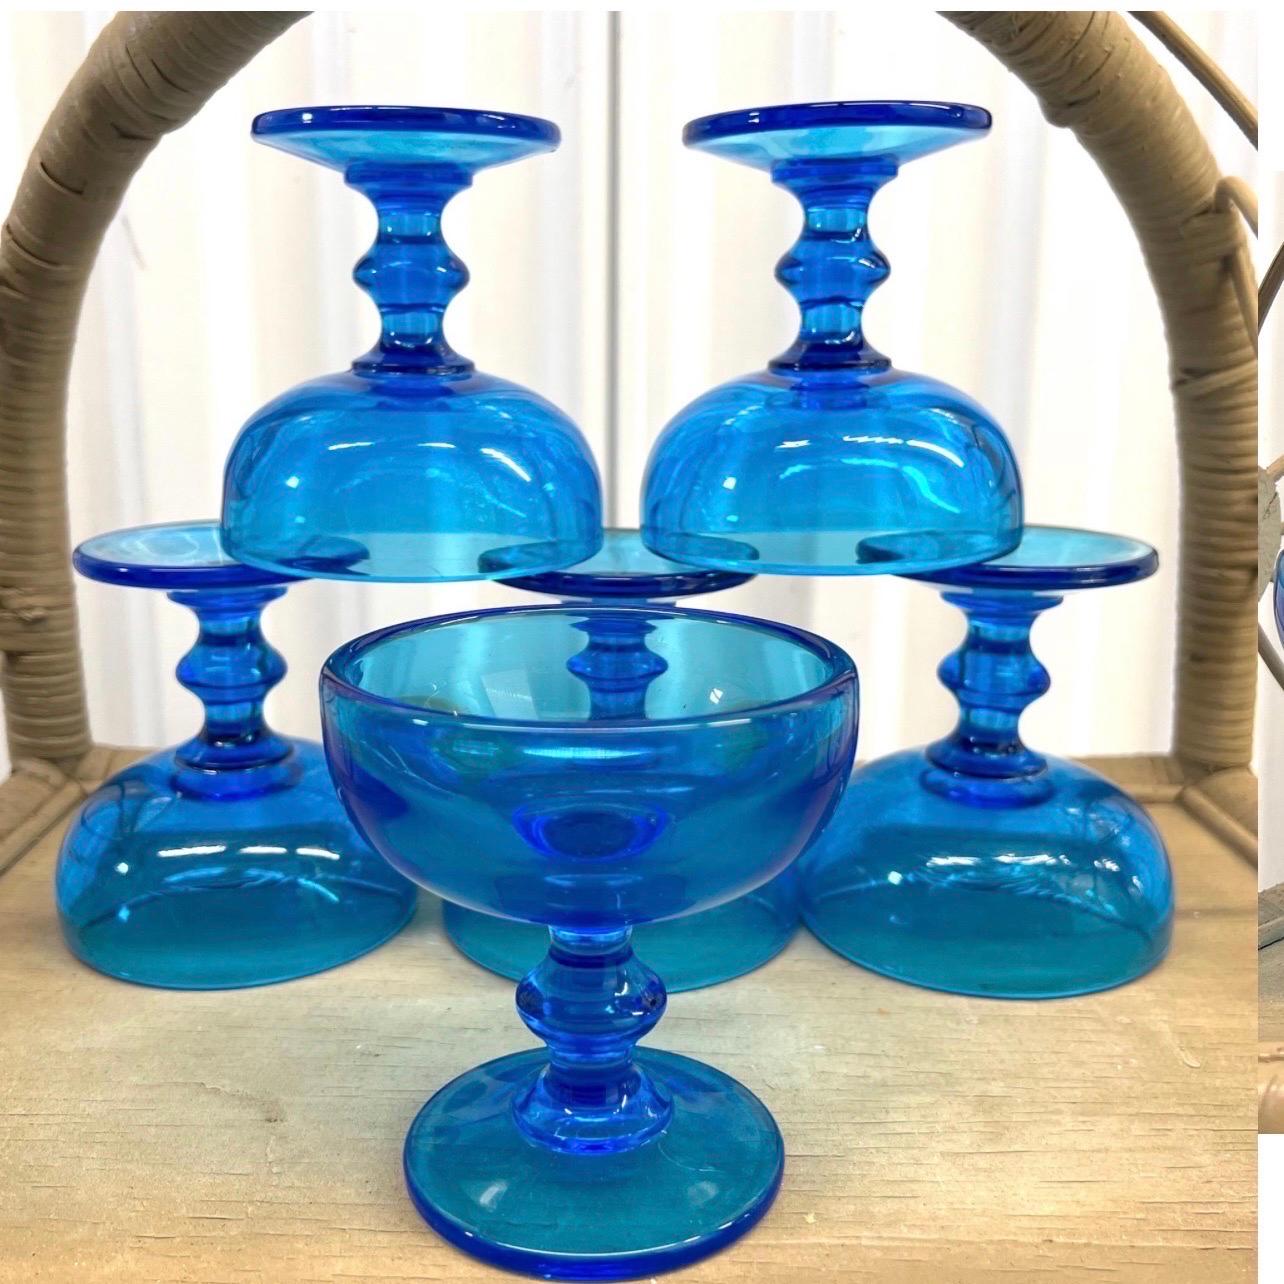 This fantastic set of cobalt blue champagne coupes or dessert glasses are thick and heavy enough for everyday use.  There are actually 7 and I am throwing in the 7th one.  Great color with no chips or cracks.